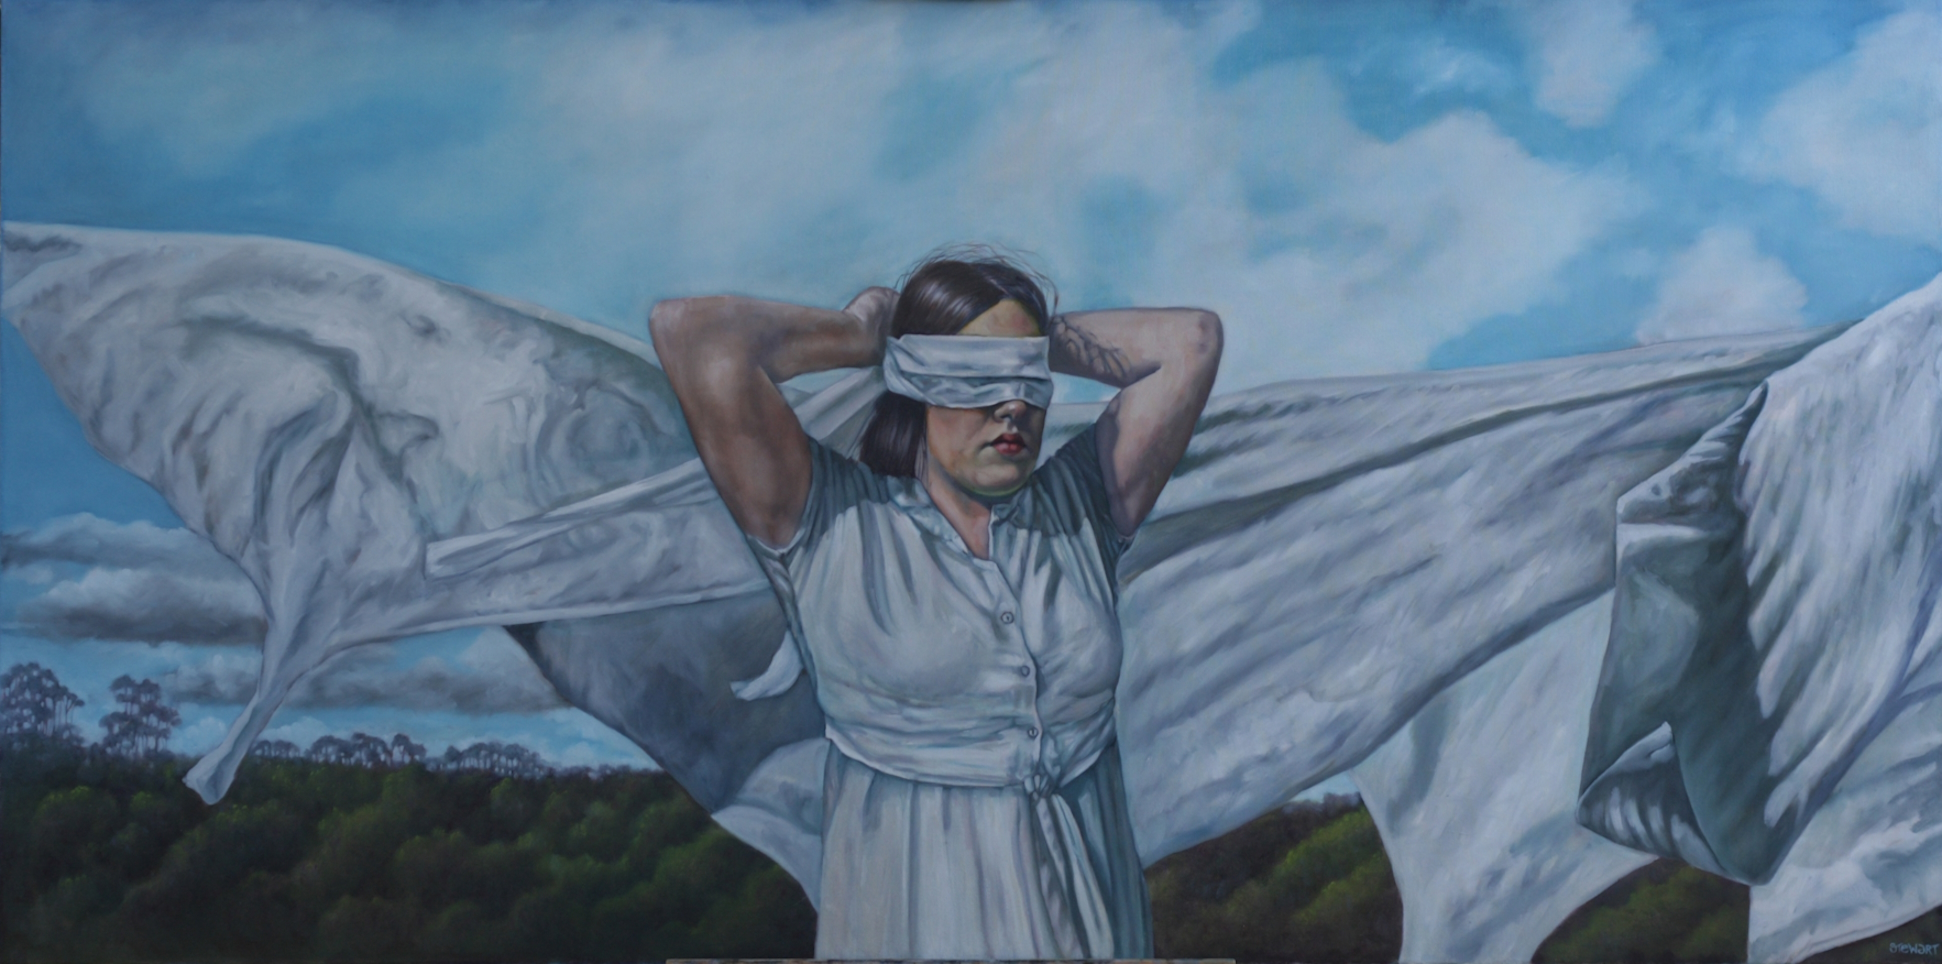 A painting of a woman standing outdoors, she is wearing a white dress and her arms are raised holding a white blindfold across her eyes. There are clouds in the blue sky and green foliage in the background. There is also a white billowing sheet behind her.